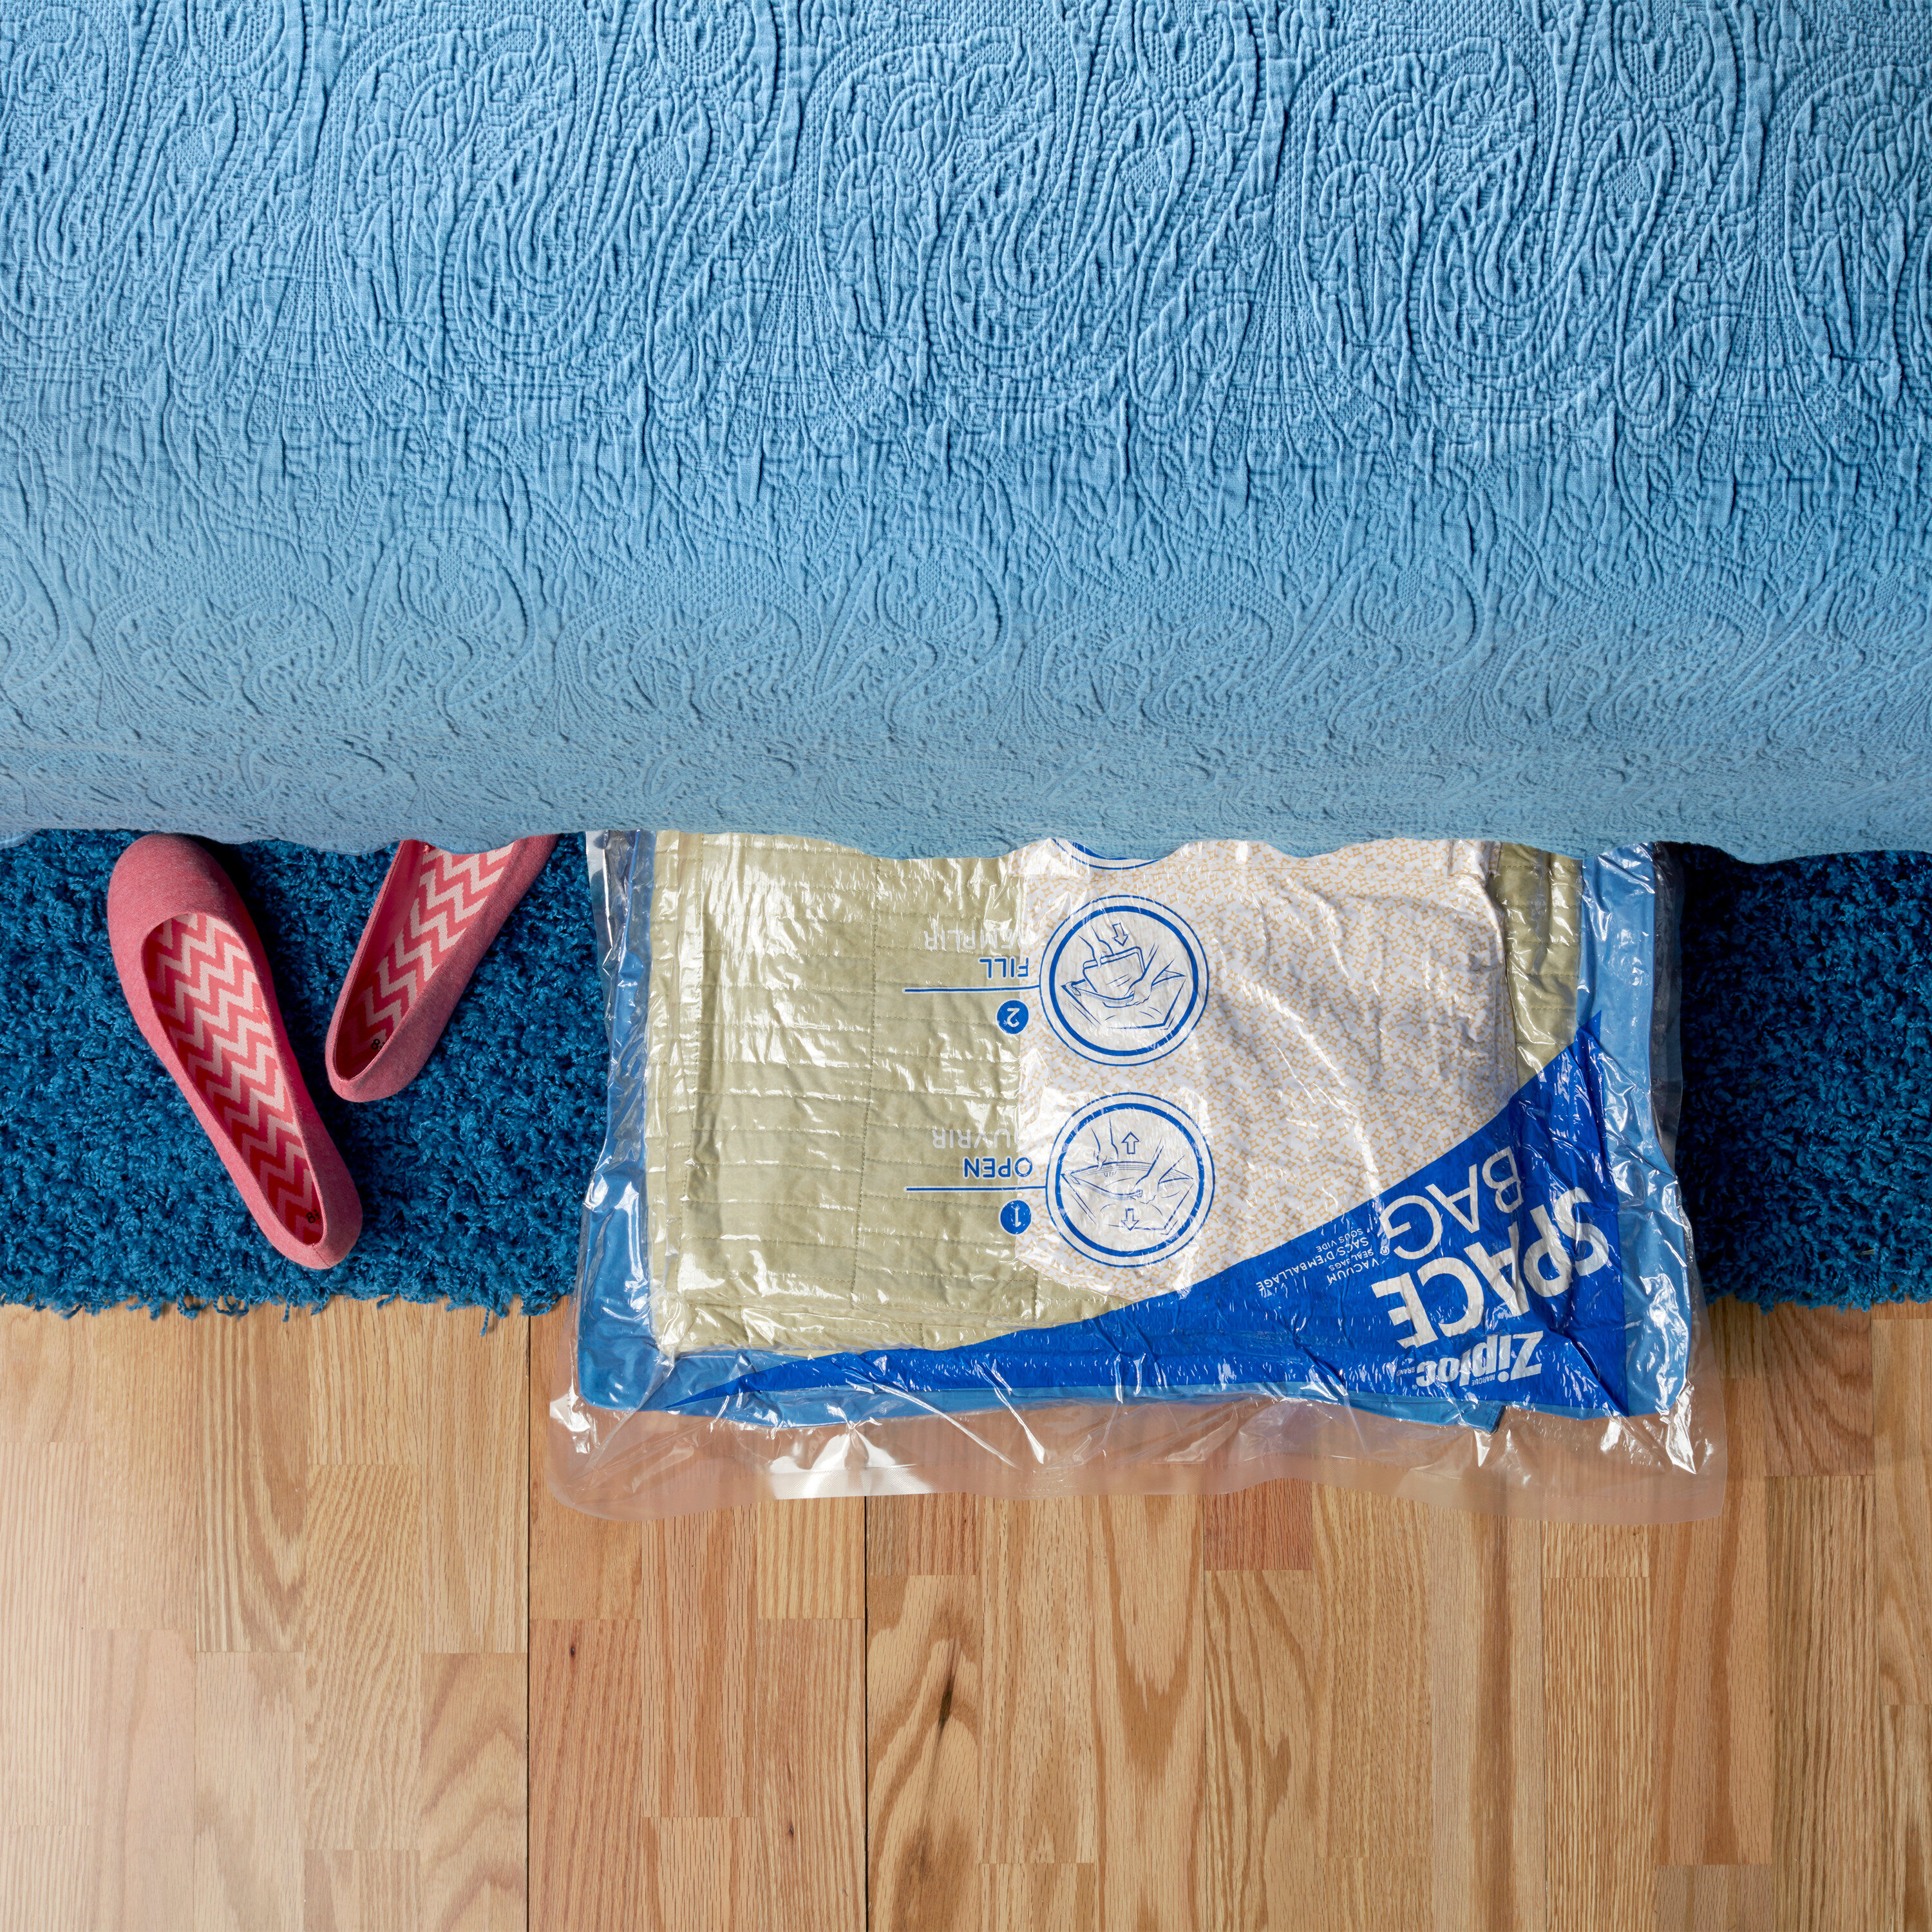 Take back your space with Ziploc® Space Bags® at Lowe's